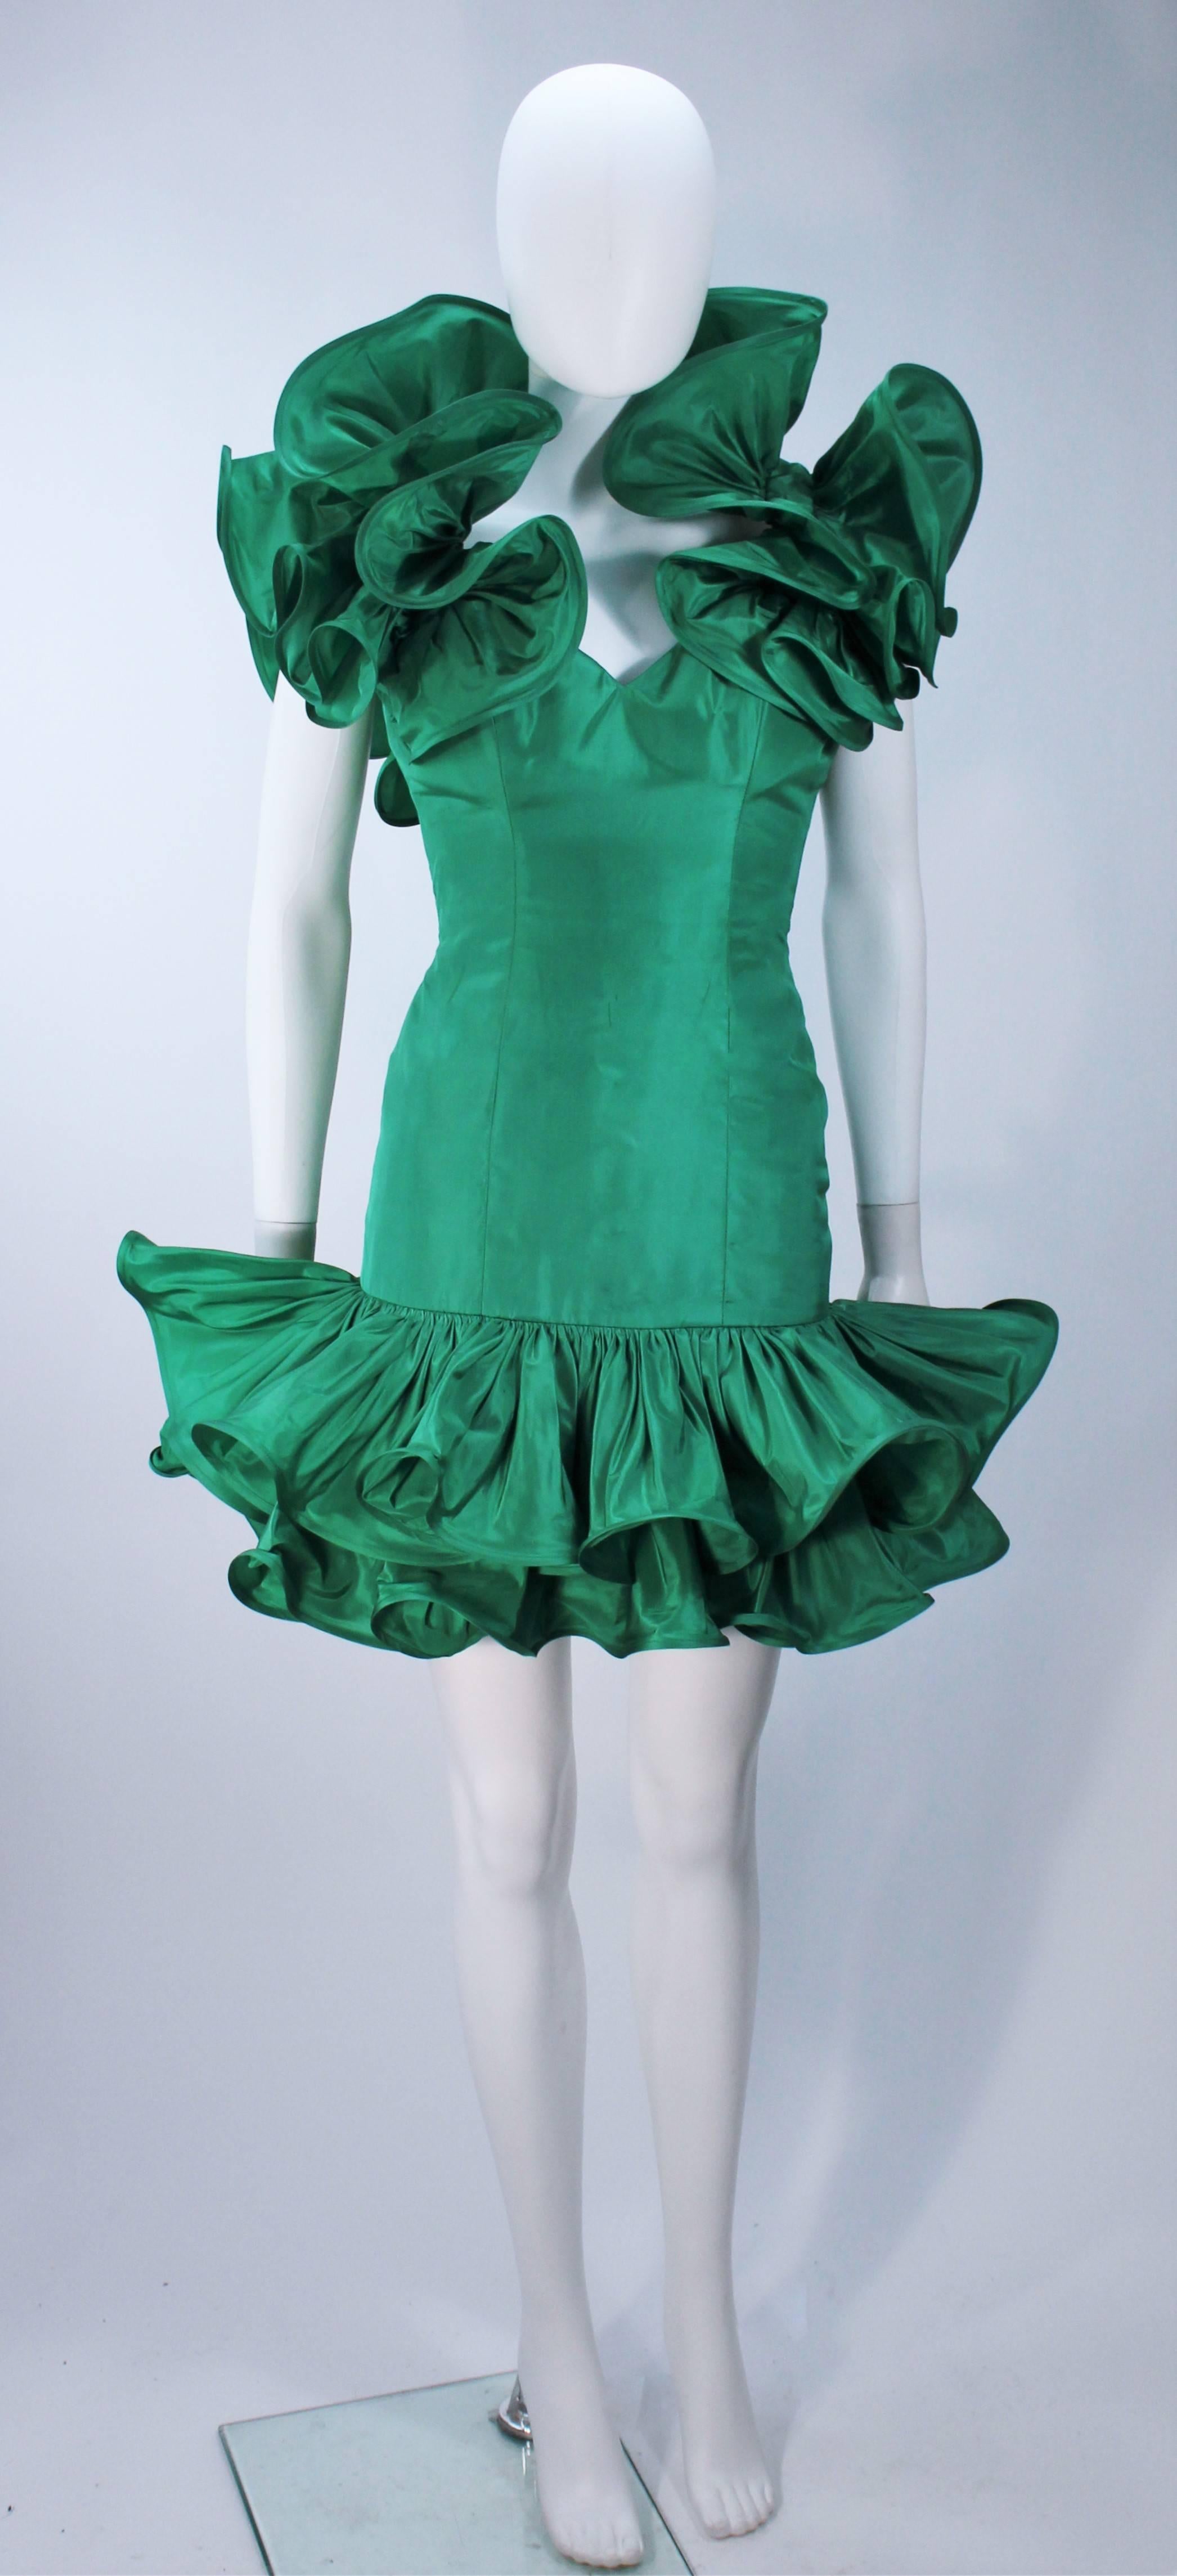  This Travilla attributed design cocktail dress is composed of a kelly green silk and features a ruffled trim with horse hair for structure. There is a zipper closure. In excellent vintage condition. 

  **Please cross-reference measurements for